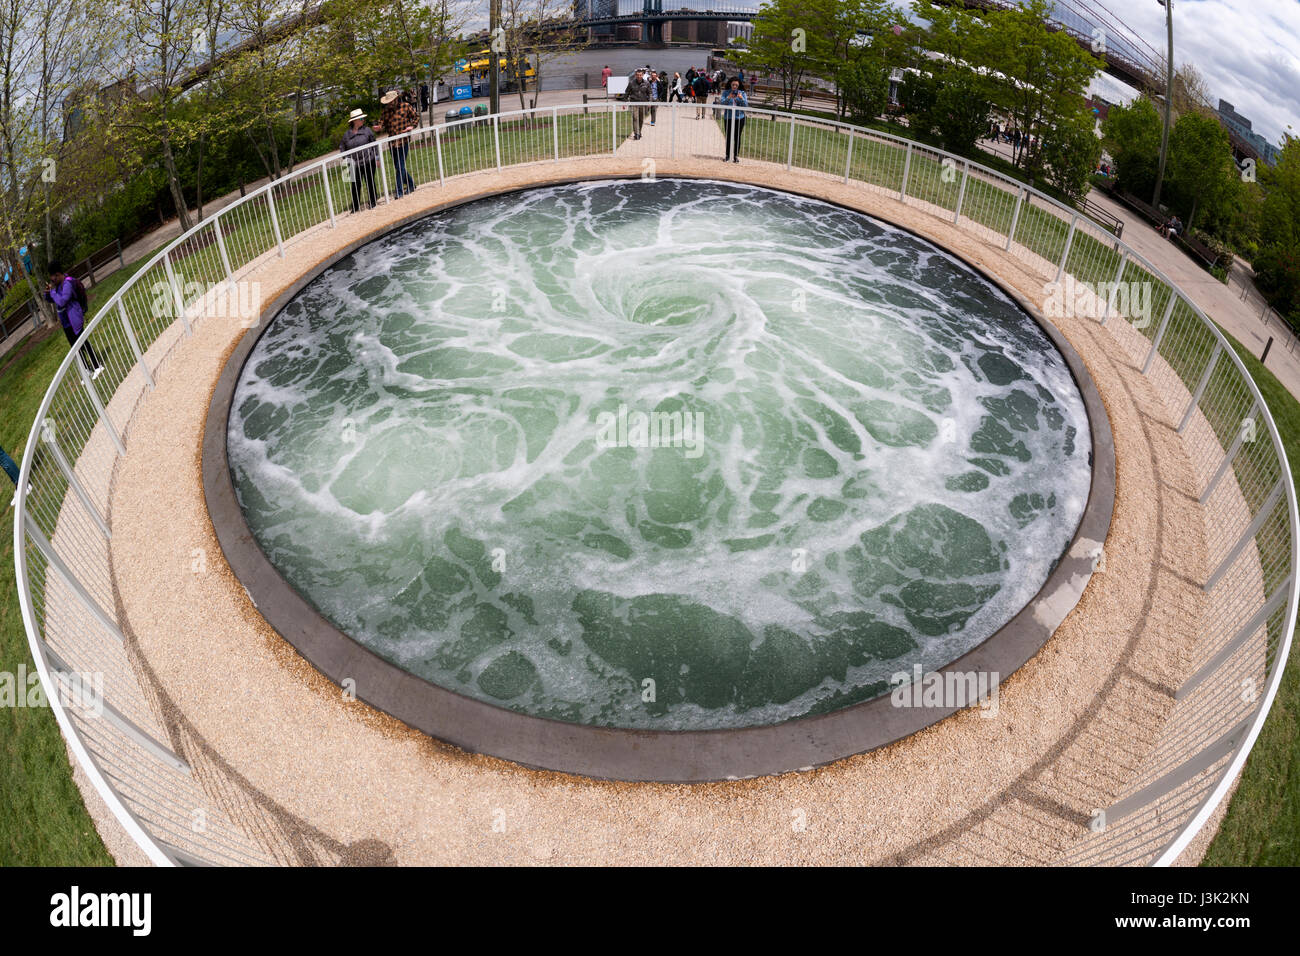 Visitors to Brooklyn Bridge Park in New York on Wednesday, May 3, 2017 are enthralled by the artist Anish Kapoor's 'Descension' installation. The artwork consists of a continuously swirling vortex of water in a 26 foot wide pool hypnotically commanding the attention of the viewer as it is reminiscent of being sucked into the depths. The installation is funded by the Public Art fund which is celebrating its 40th anniversary. 'Descension' will be on view until September 10, 2017 on Pier 1 in the park. (© Richard B. Levine) Stock Photo